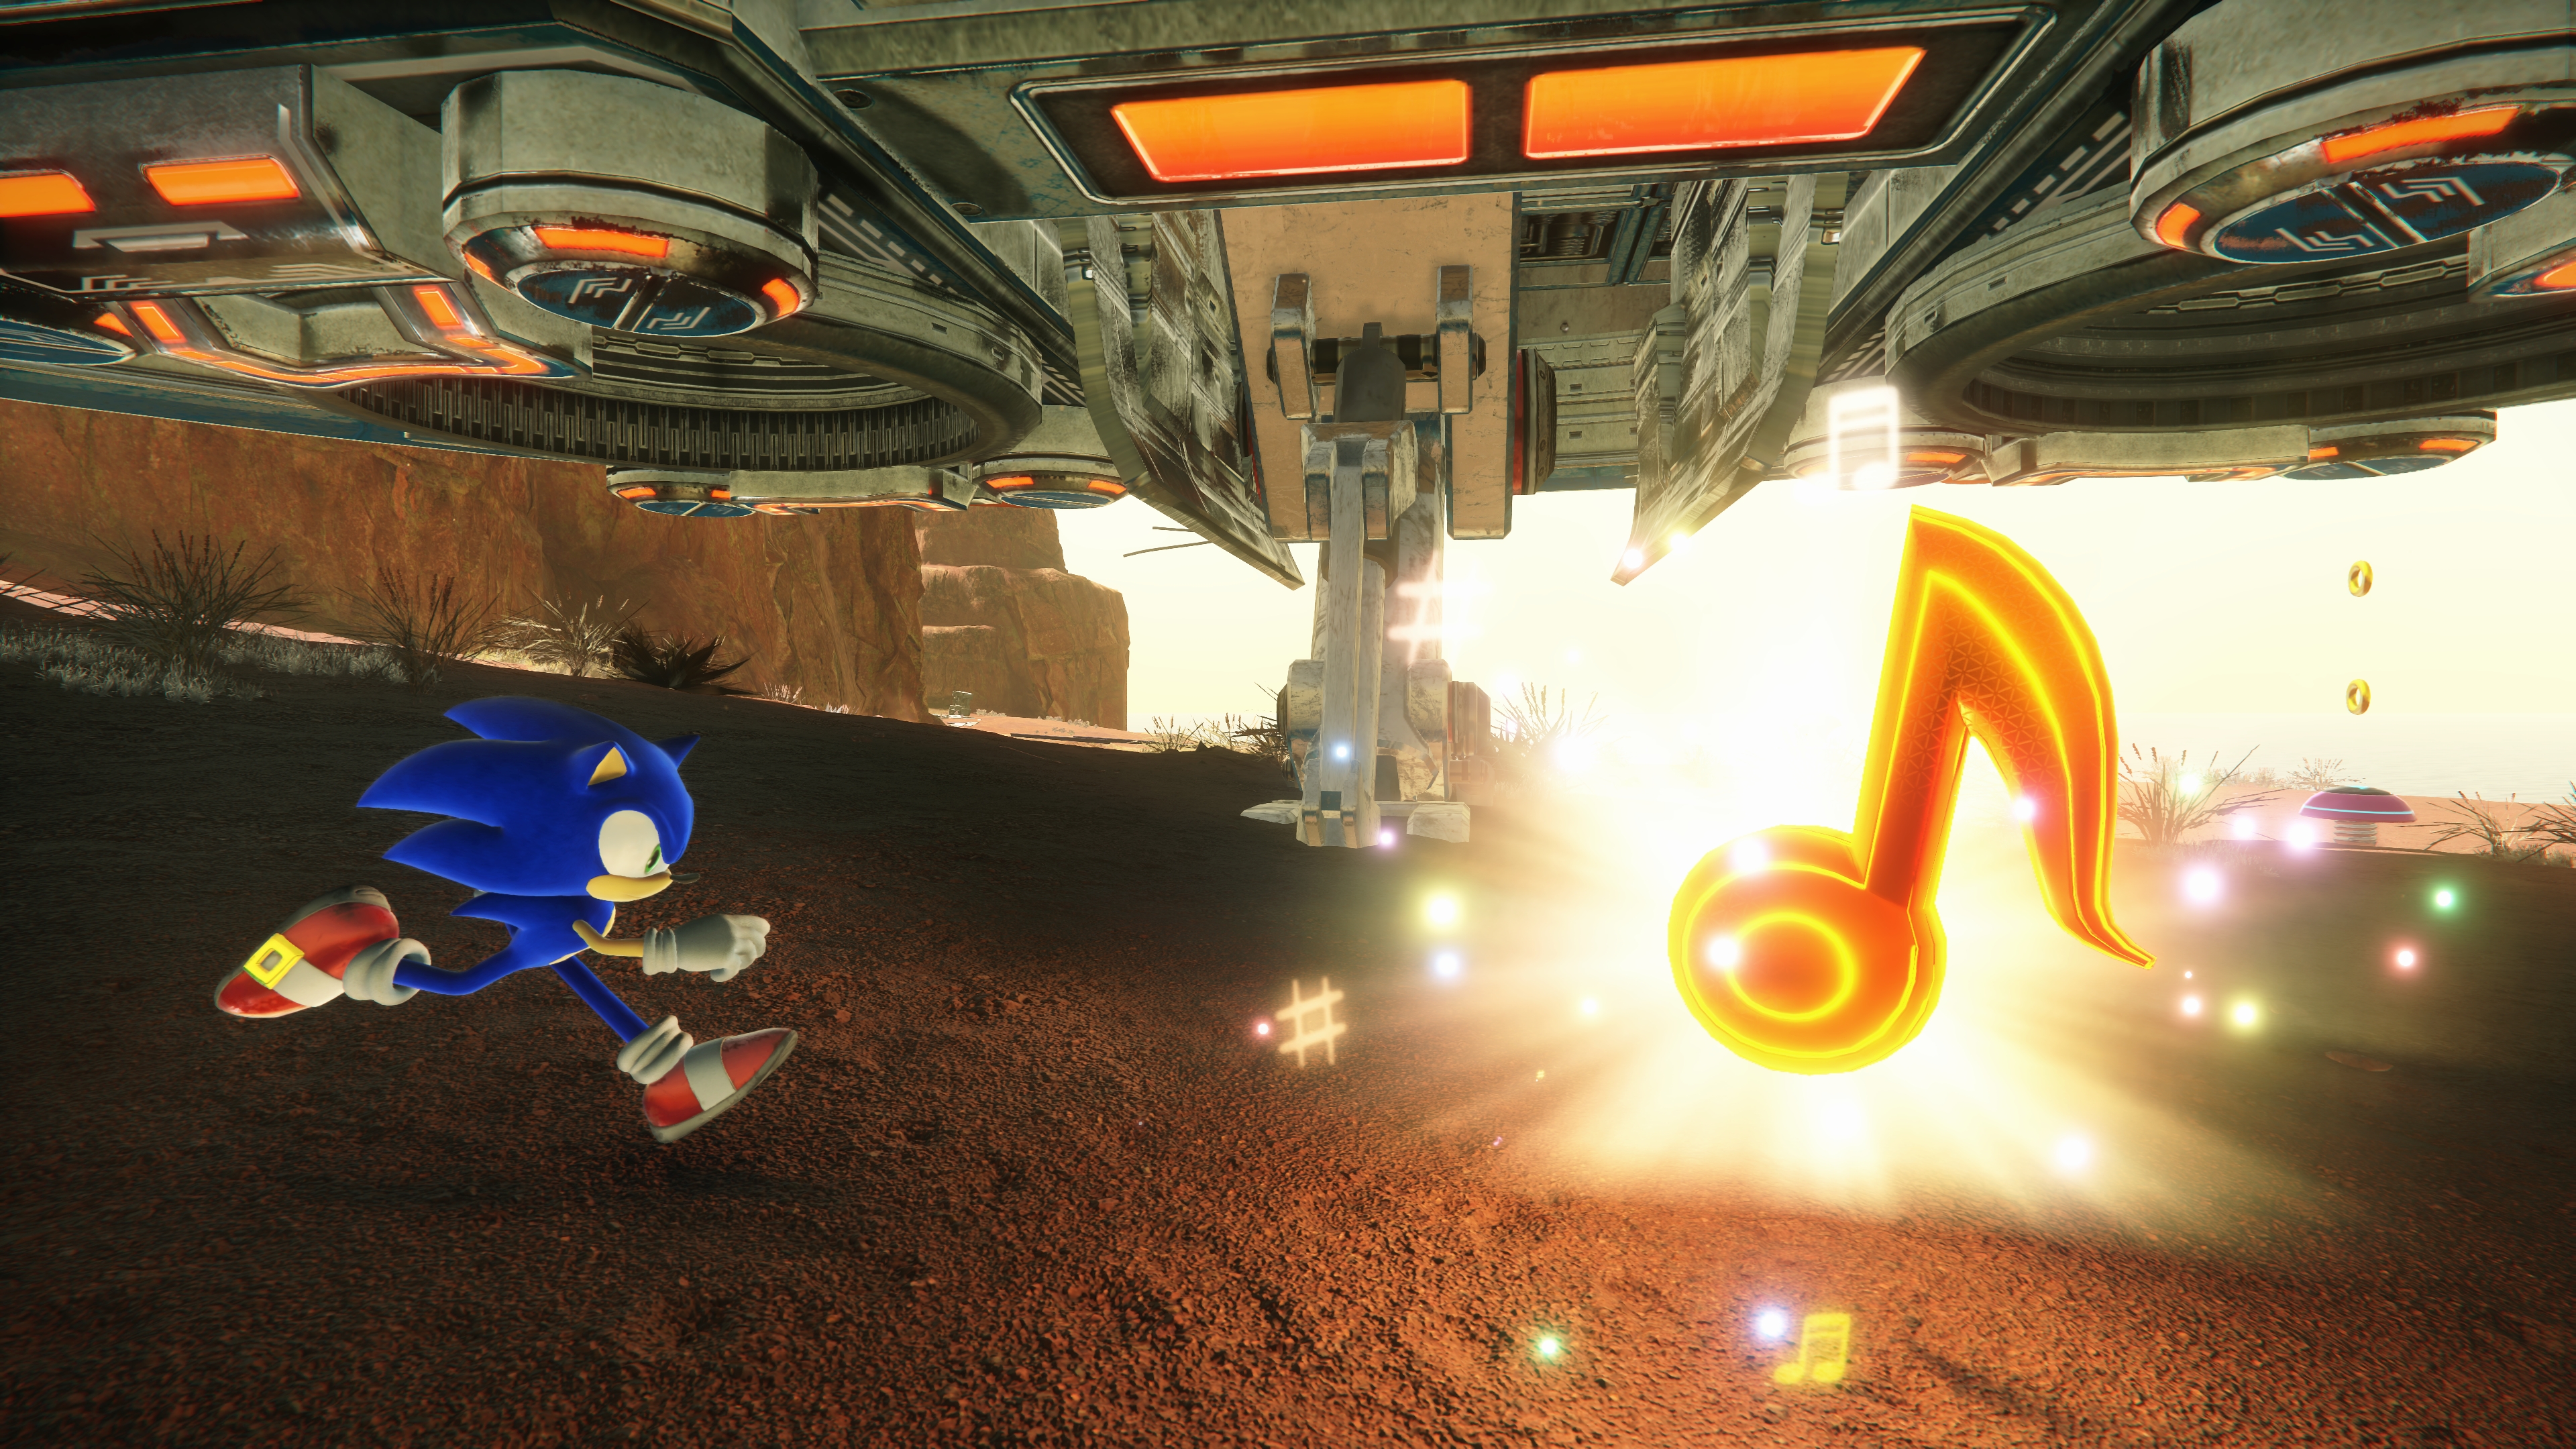 Sonic Frontiers DLC 1 - 'Sights, Sounds & Speed' - Coming March 22